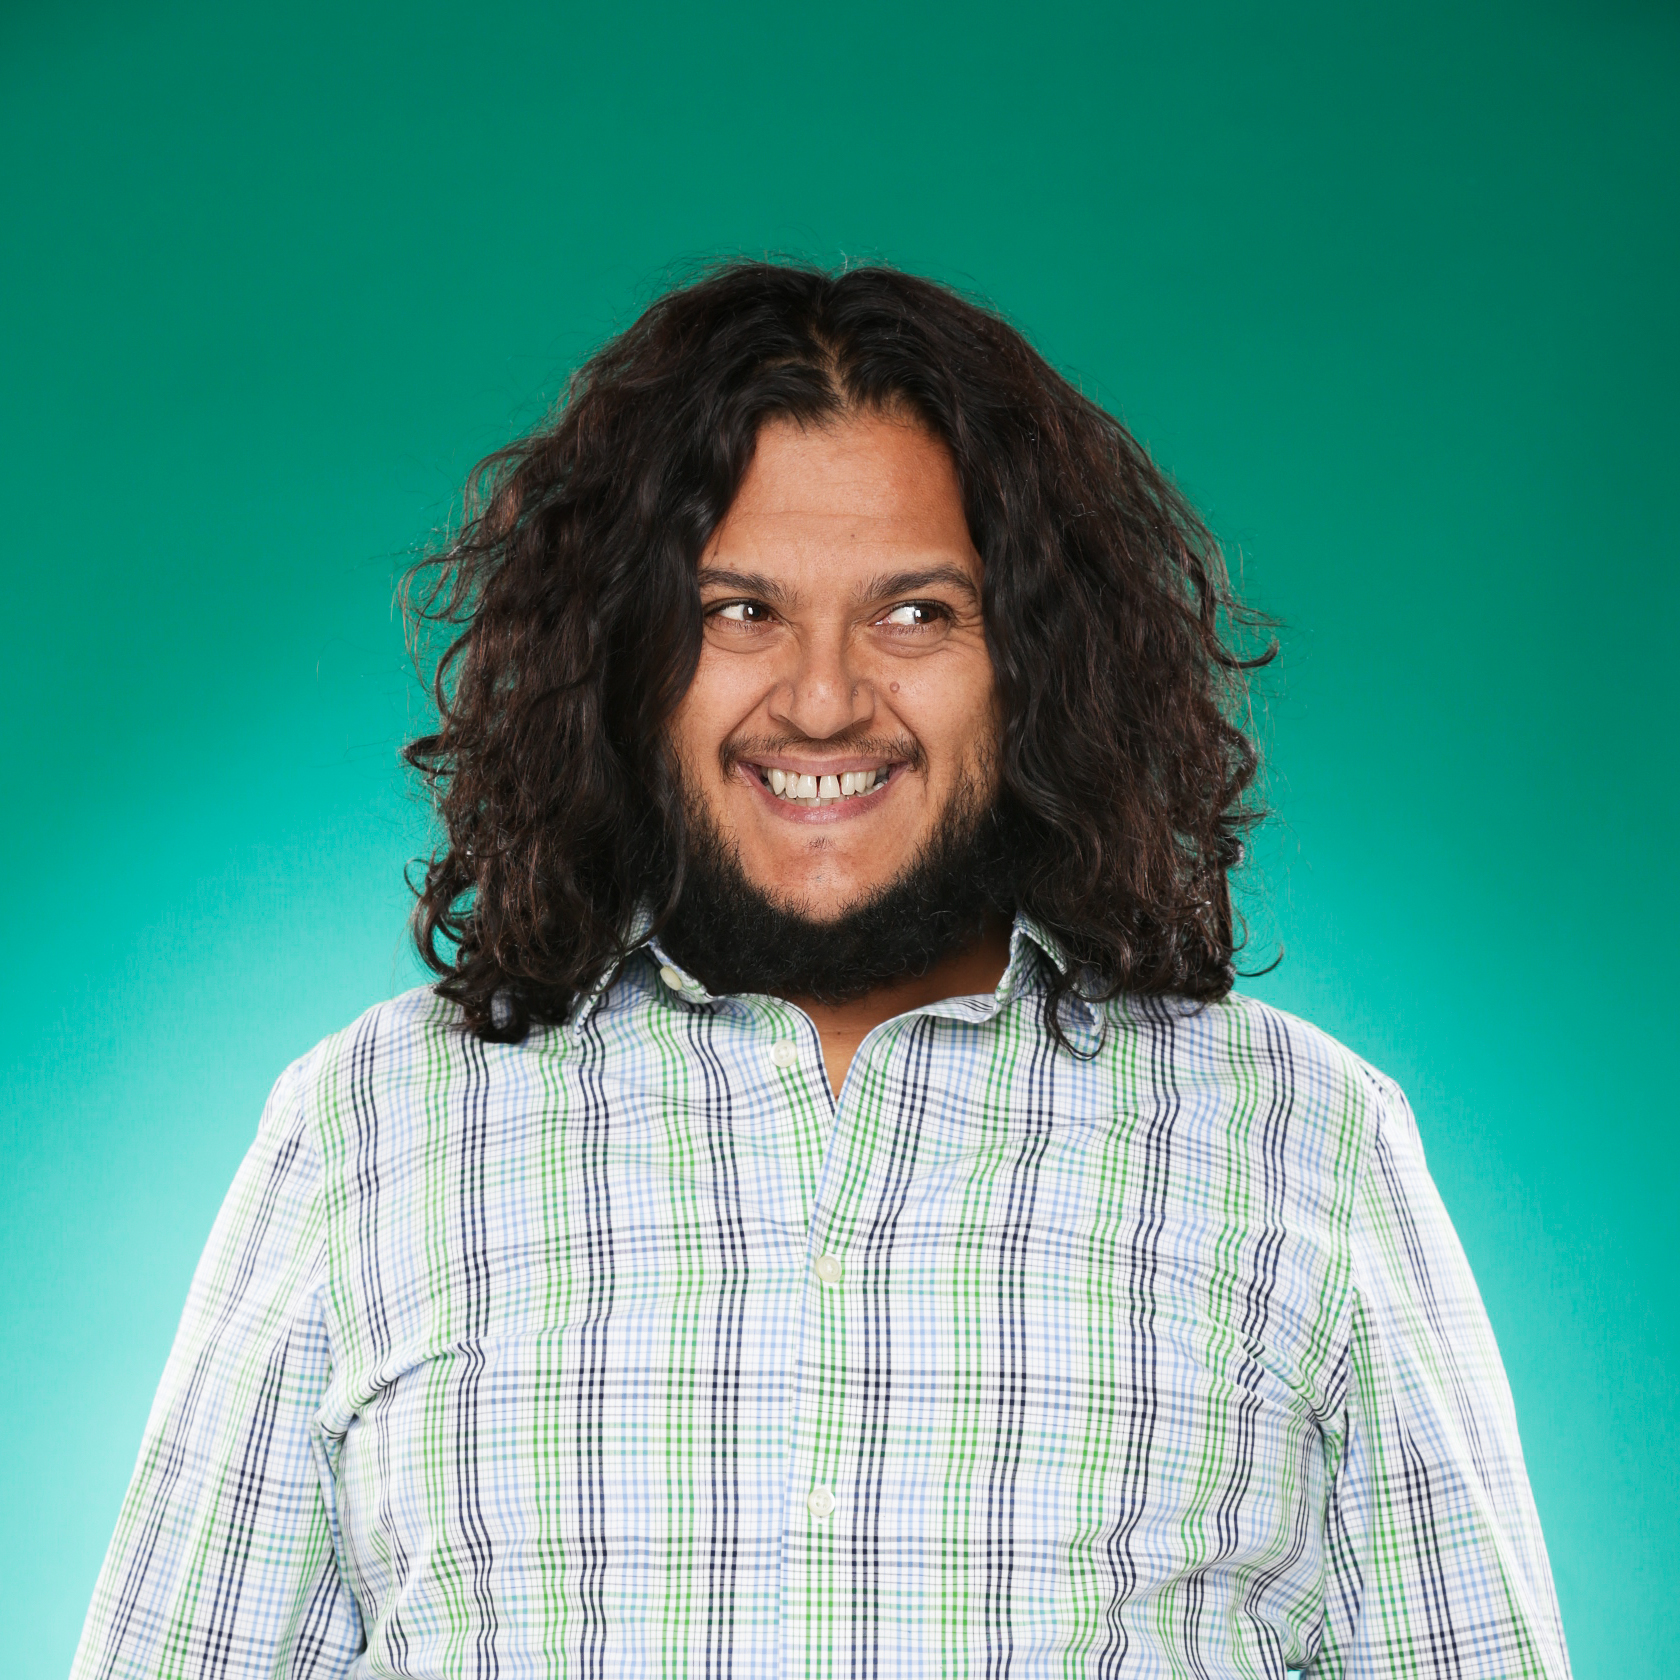 Felipe Esparza, 2010 winner of The Last Comic Standing, appears in the Hot 97 April Fools Comedy Show hosted by Tracy Morgan. 4/1/16, 8pm,  at The Theater at Madison Square Garden.